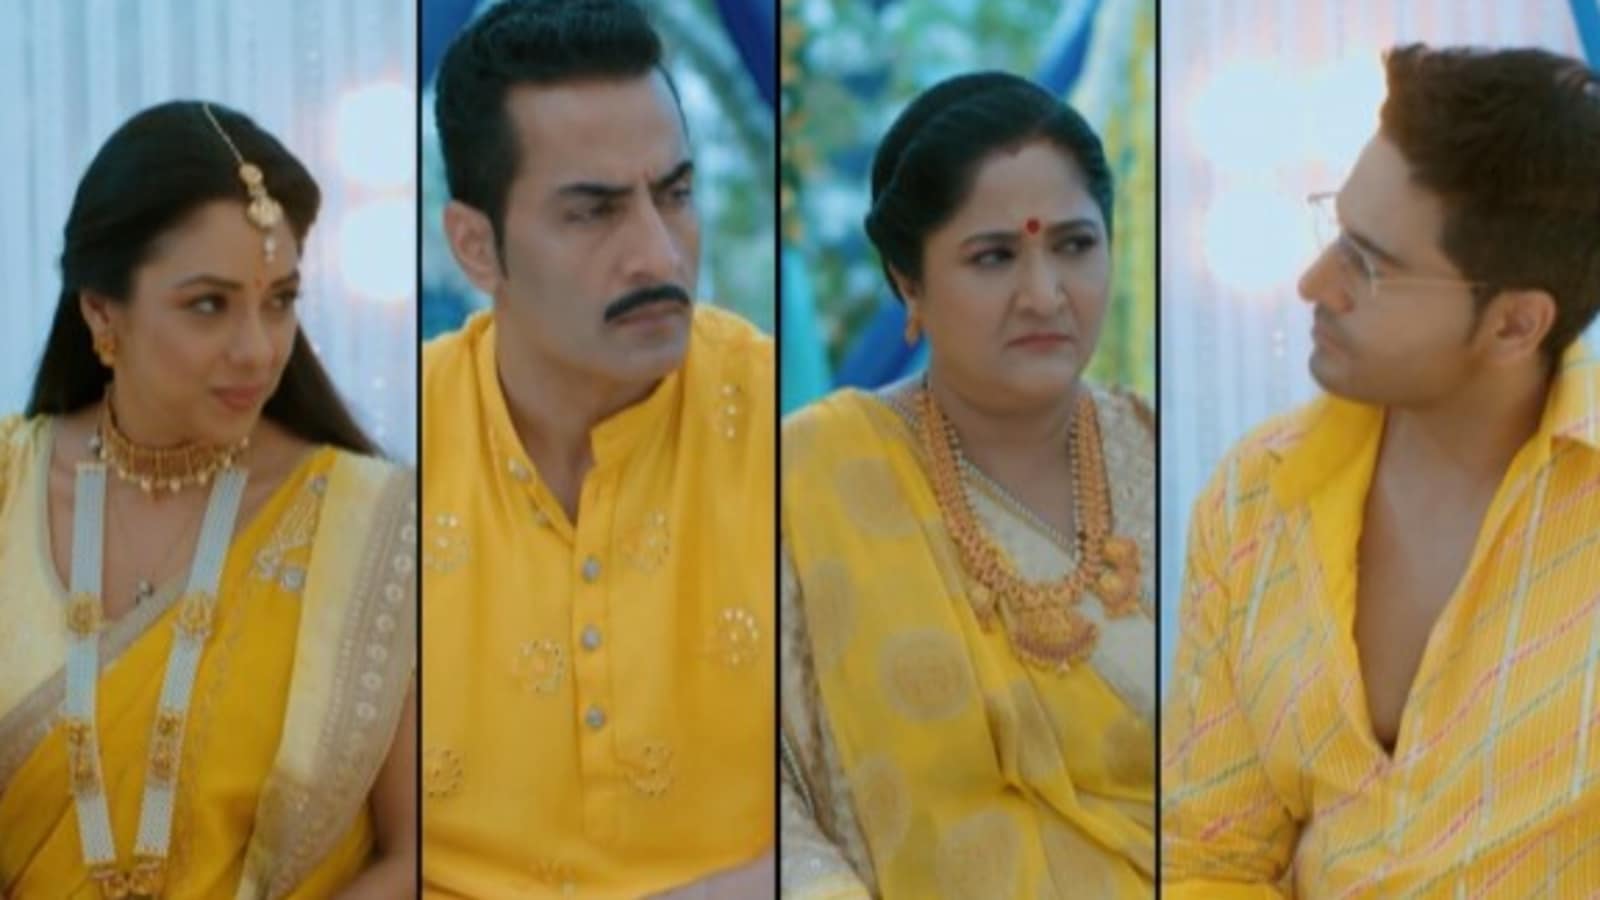 Anupama written update May 13: Anuj and Anupama’s haldi ceremony begins amid tensions